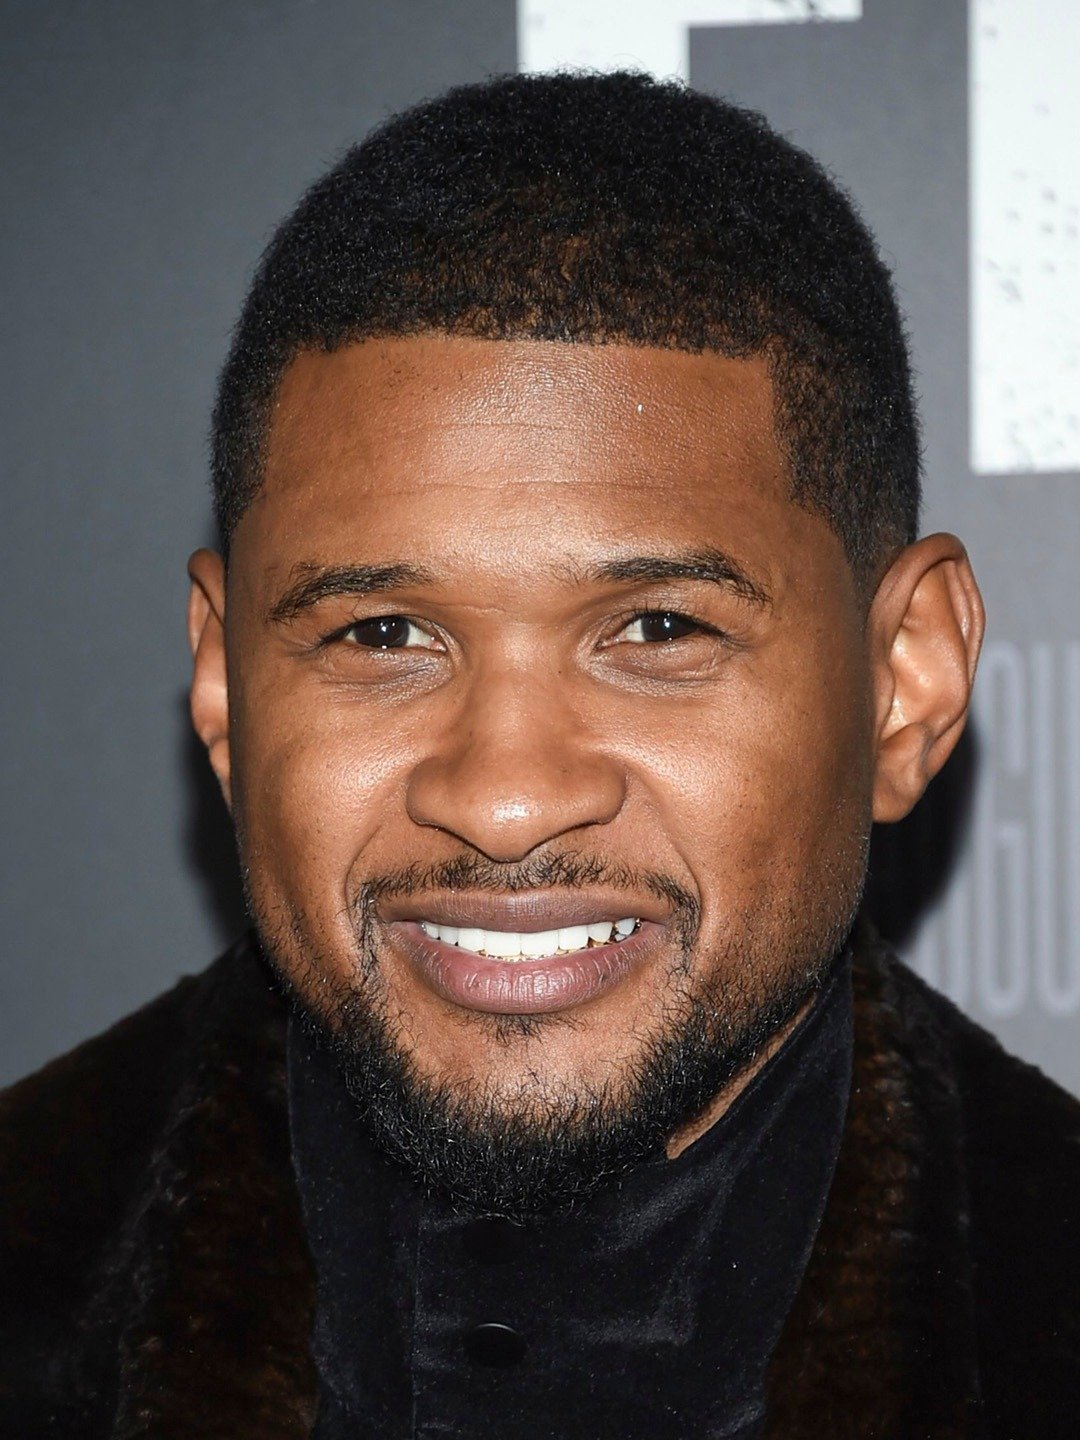 Entertainment News Roundup: R&B star Usher to headline 2024 Super Bowl halftime show; Striking Hollywood writers reach tentative deal with studios and more 